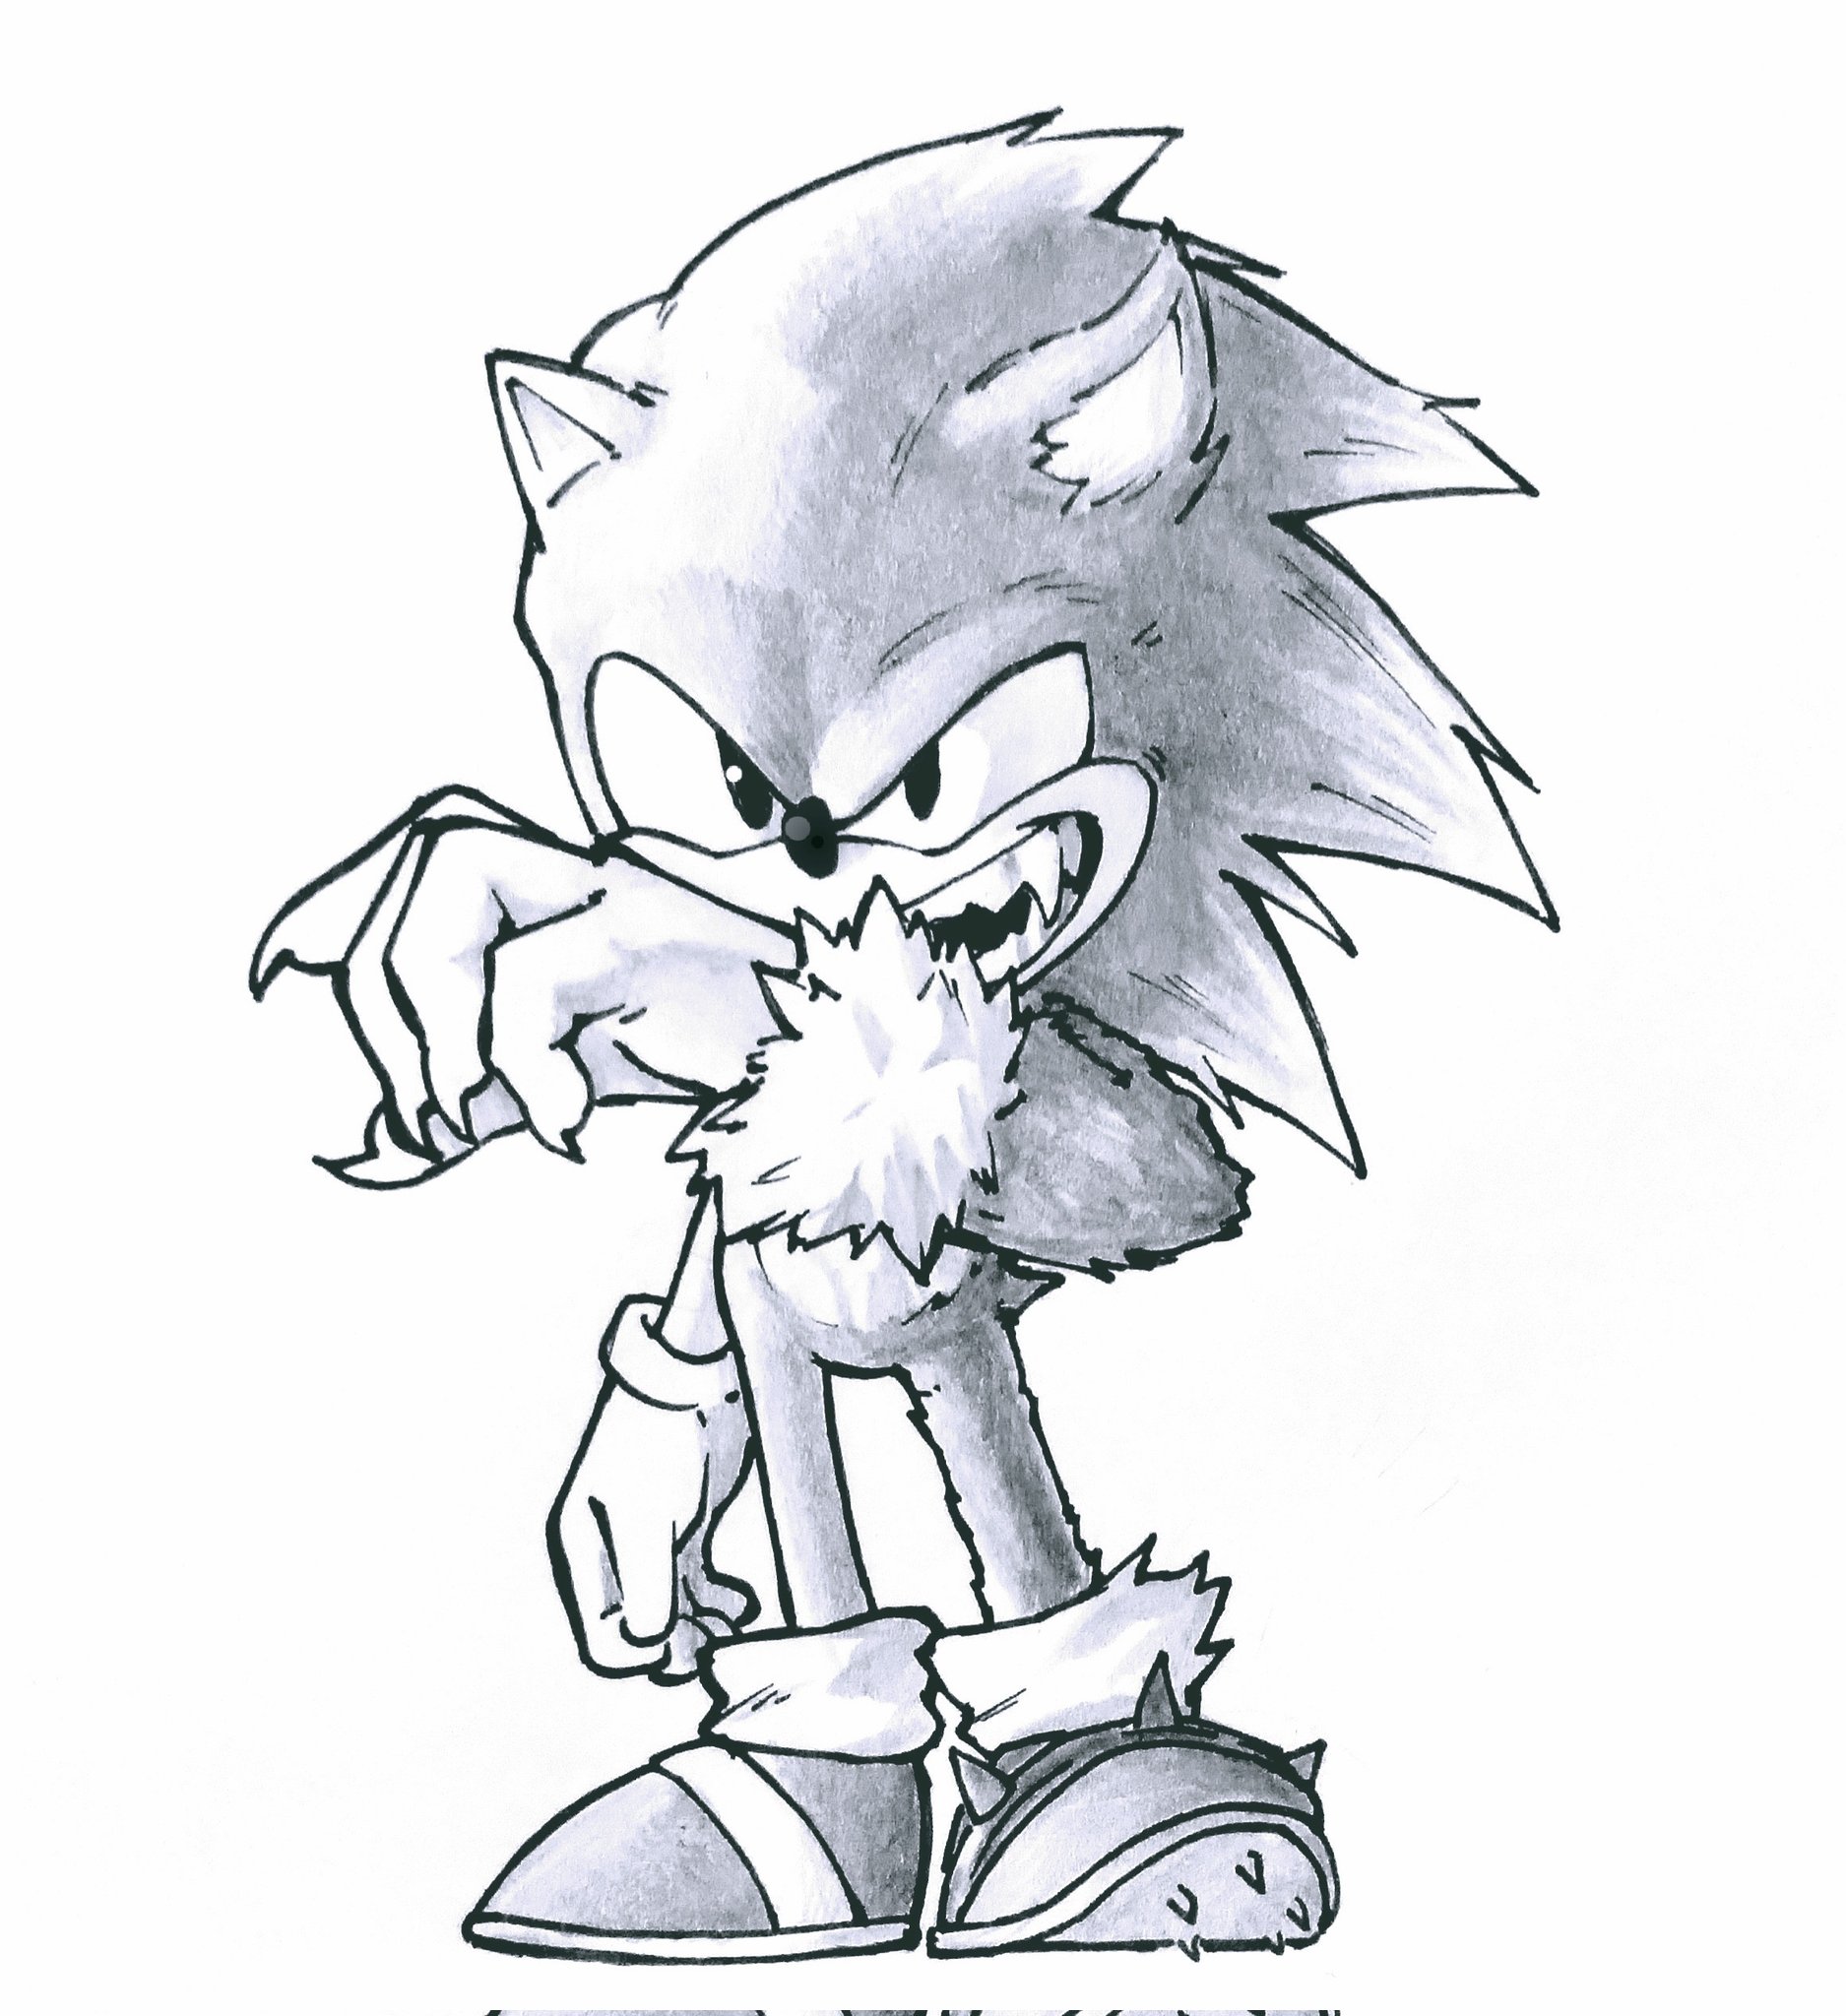 Coloring page - Sonic Unleashed